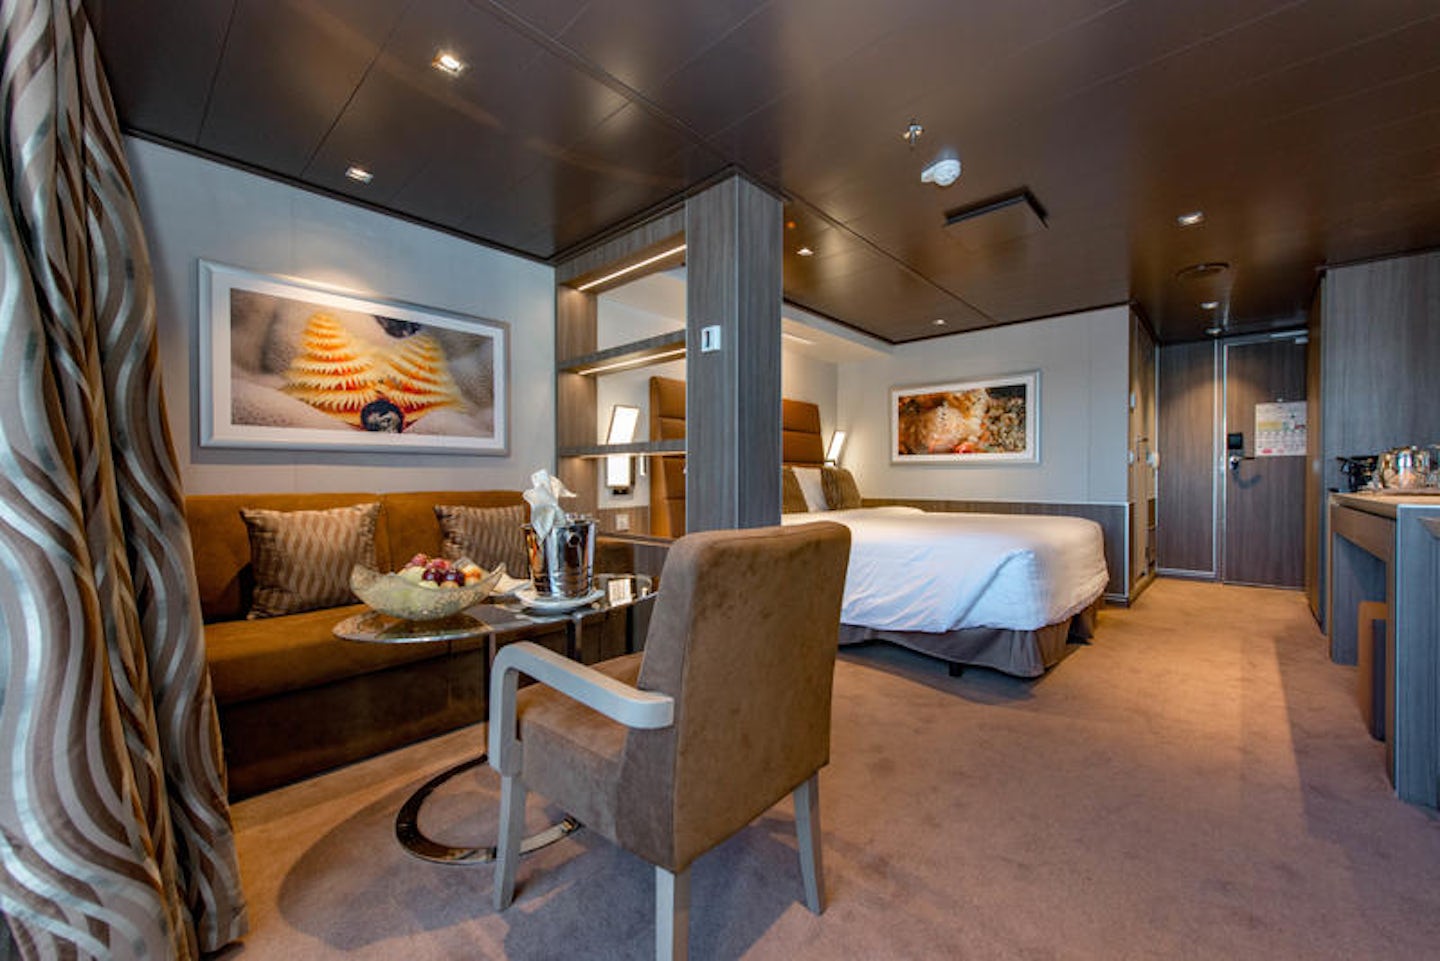 The MSC Yacht Club Deluxe Suite on MSC Seaview